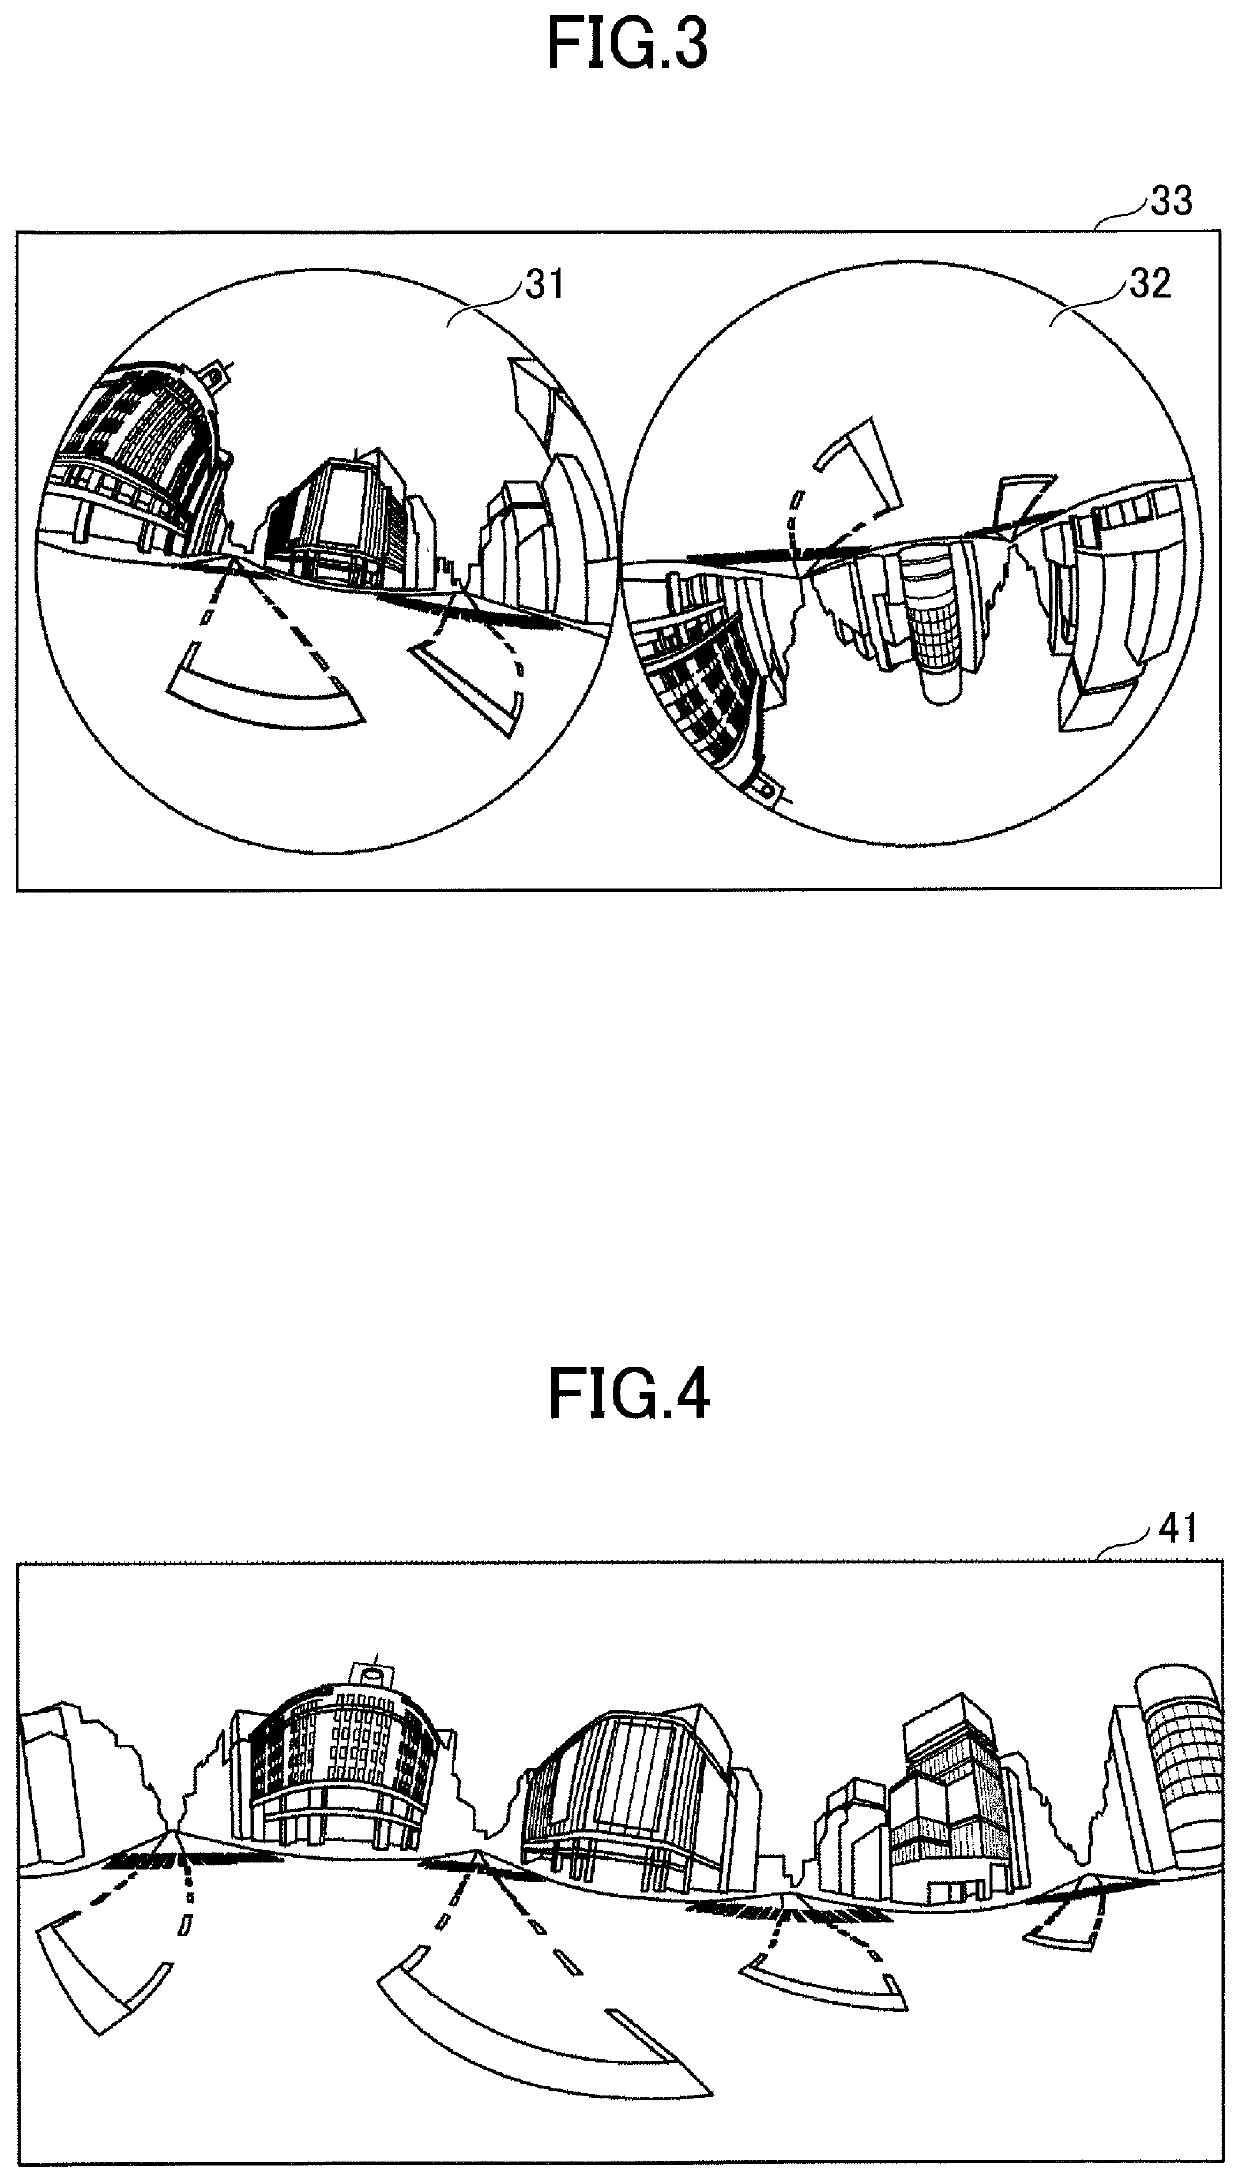 Imaging system, developing system, and imaging method